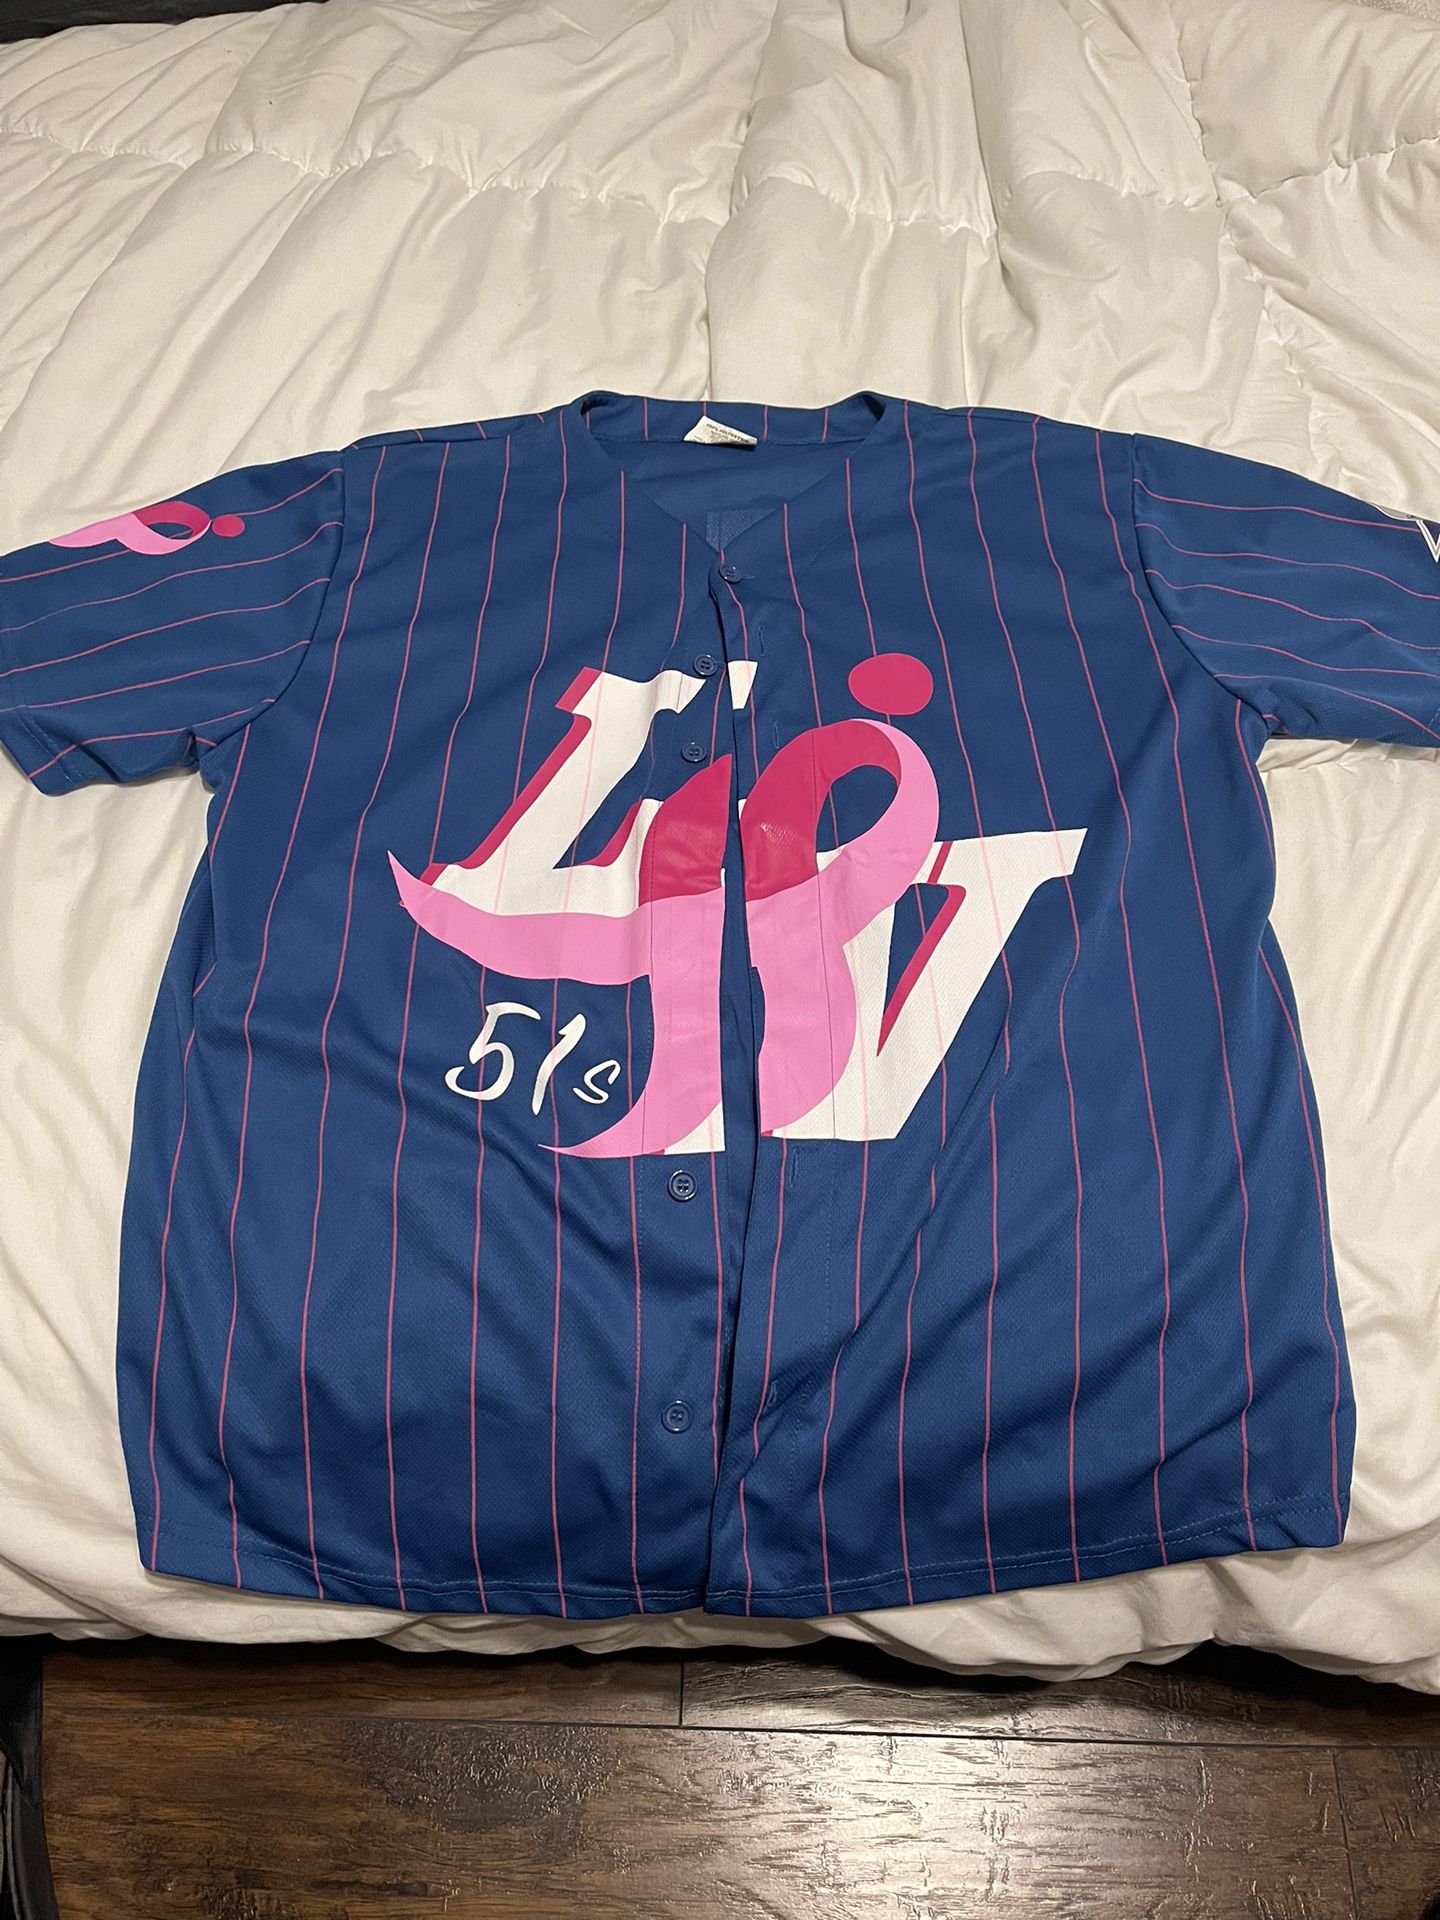 LV 51’s Jersey